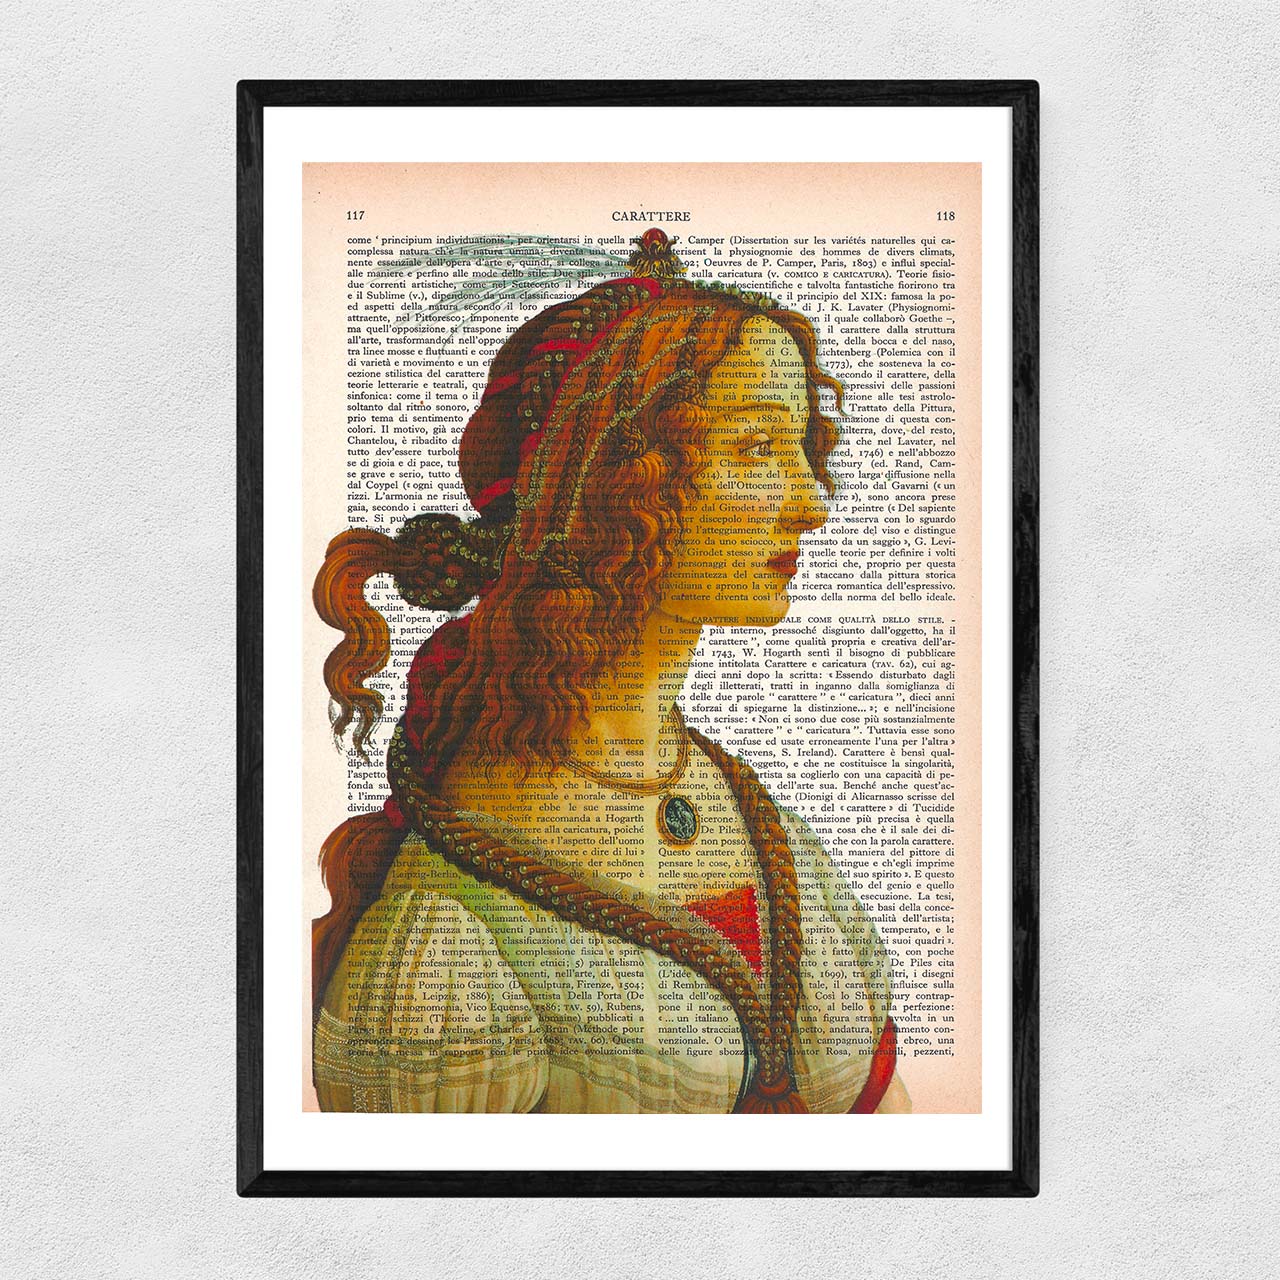 Mix-up: Portrait of a Young Woman - Botticelli